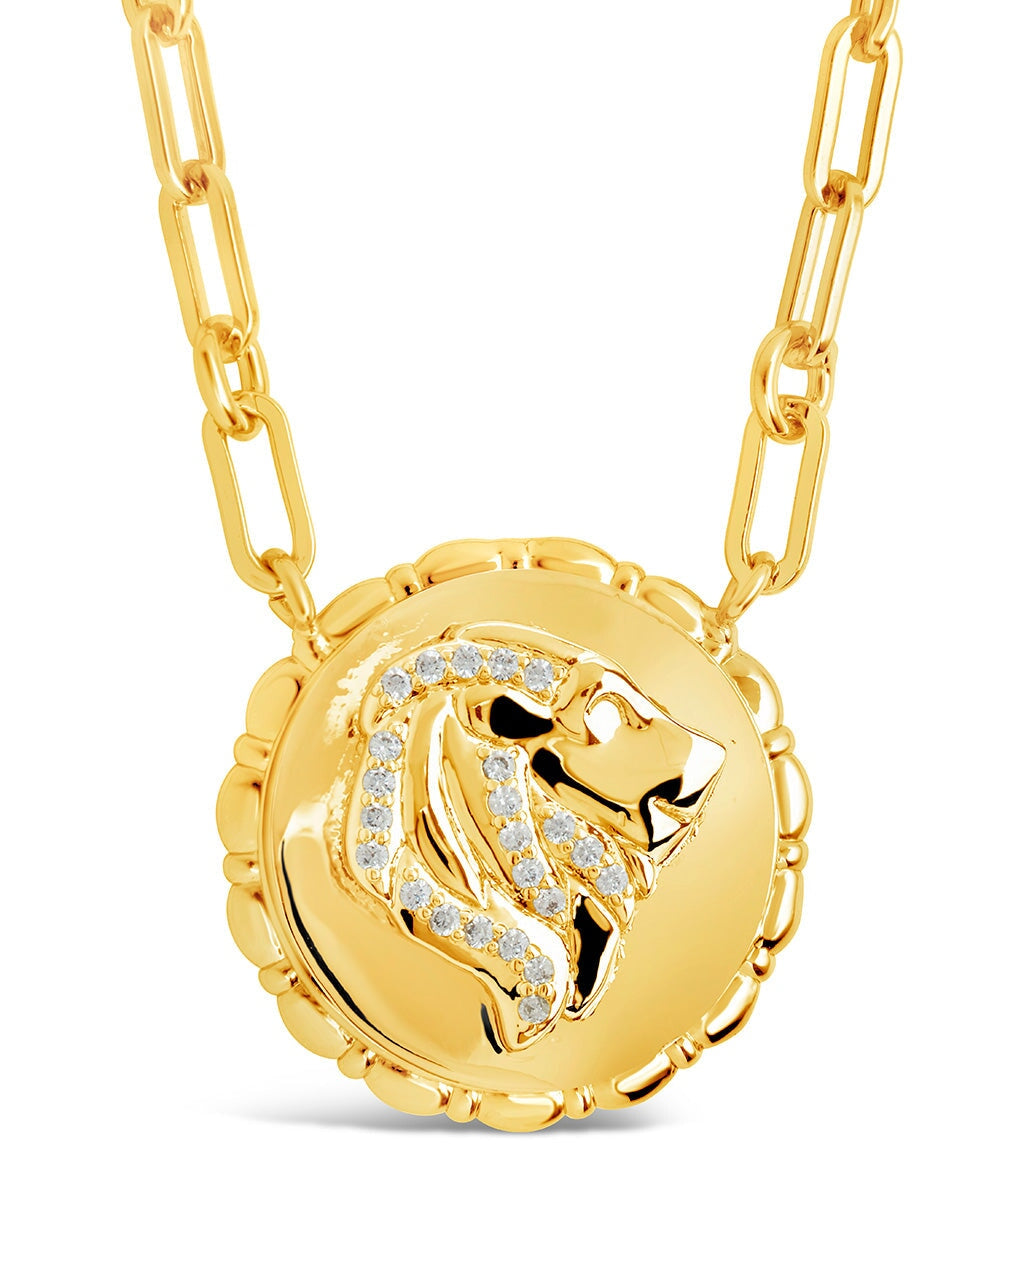 Lion Head Necklace / CHANEL star , New never been worn Gold